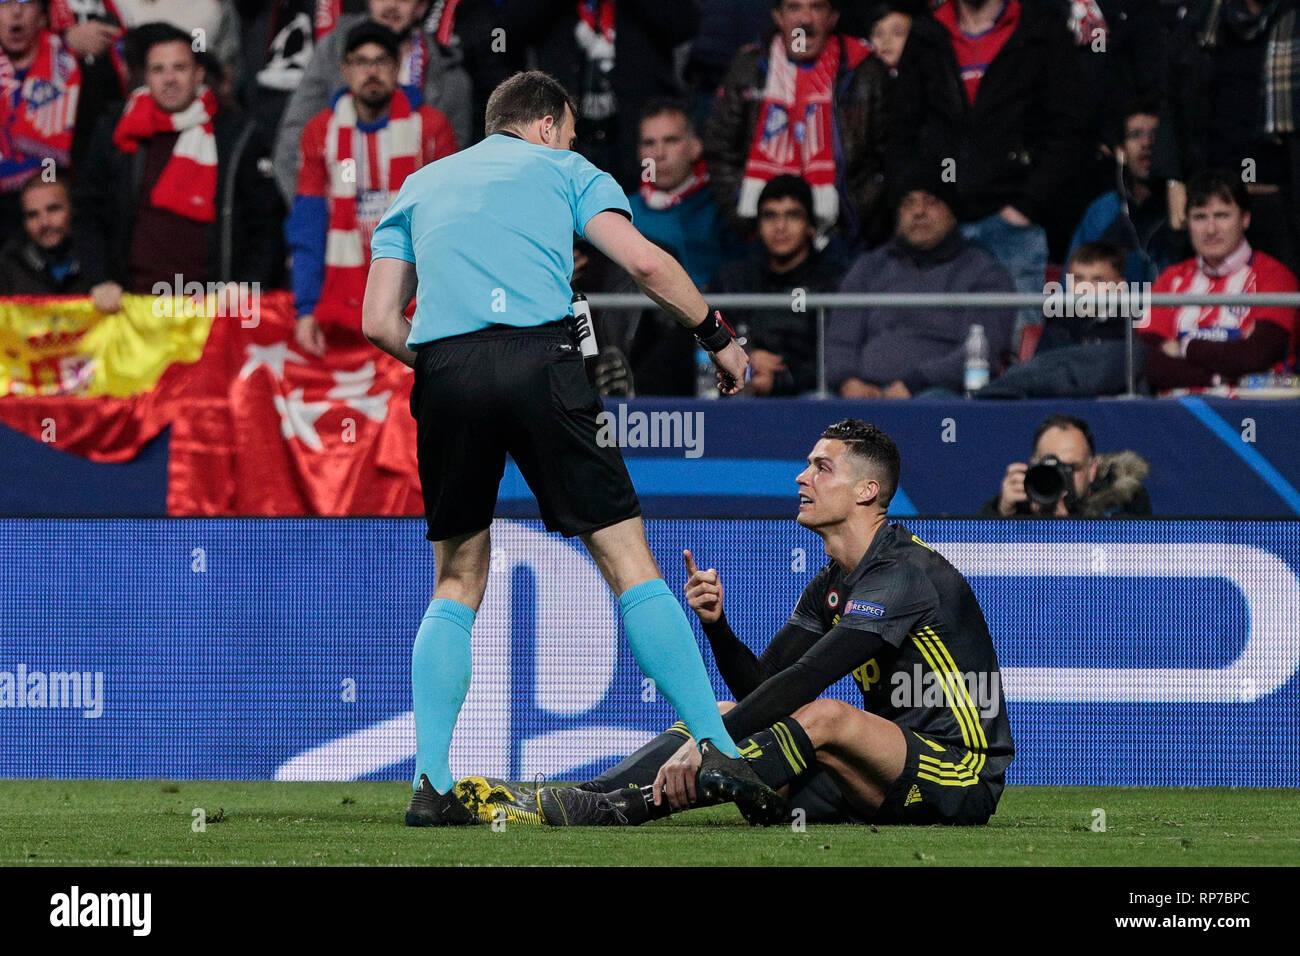 Juventus' Cristiano Ronaldo seen having words with the referee during the UEFA Champions League match, Round of 16, 1st leg between Atletico de Madrid and Juventus at Wanda Metropolitano Stadium in Madrid, Spain. Stock Photo